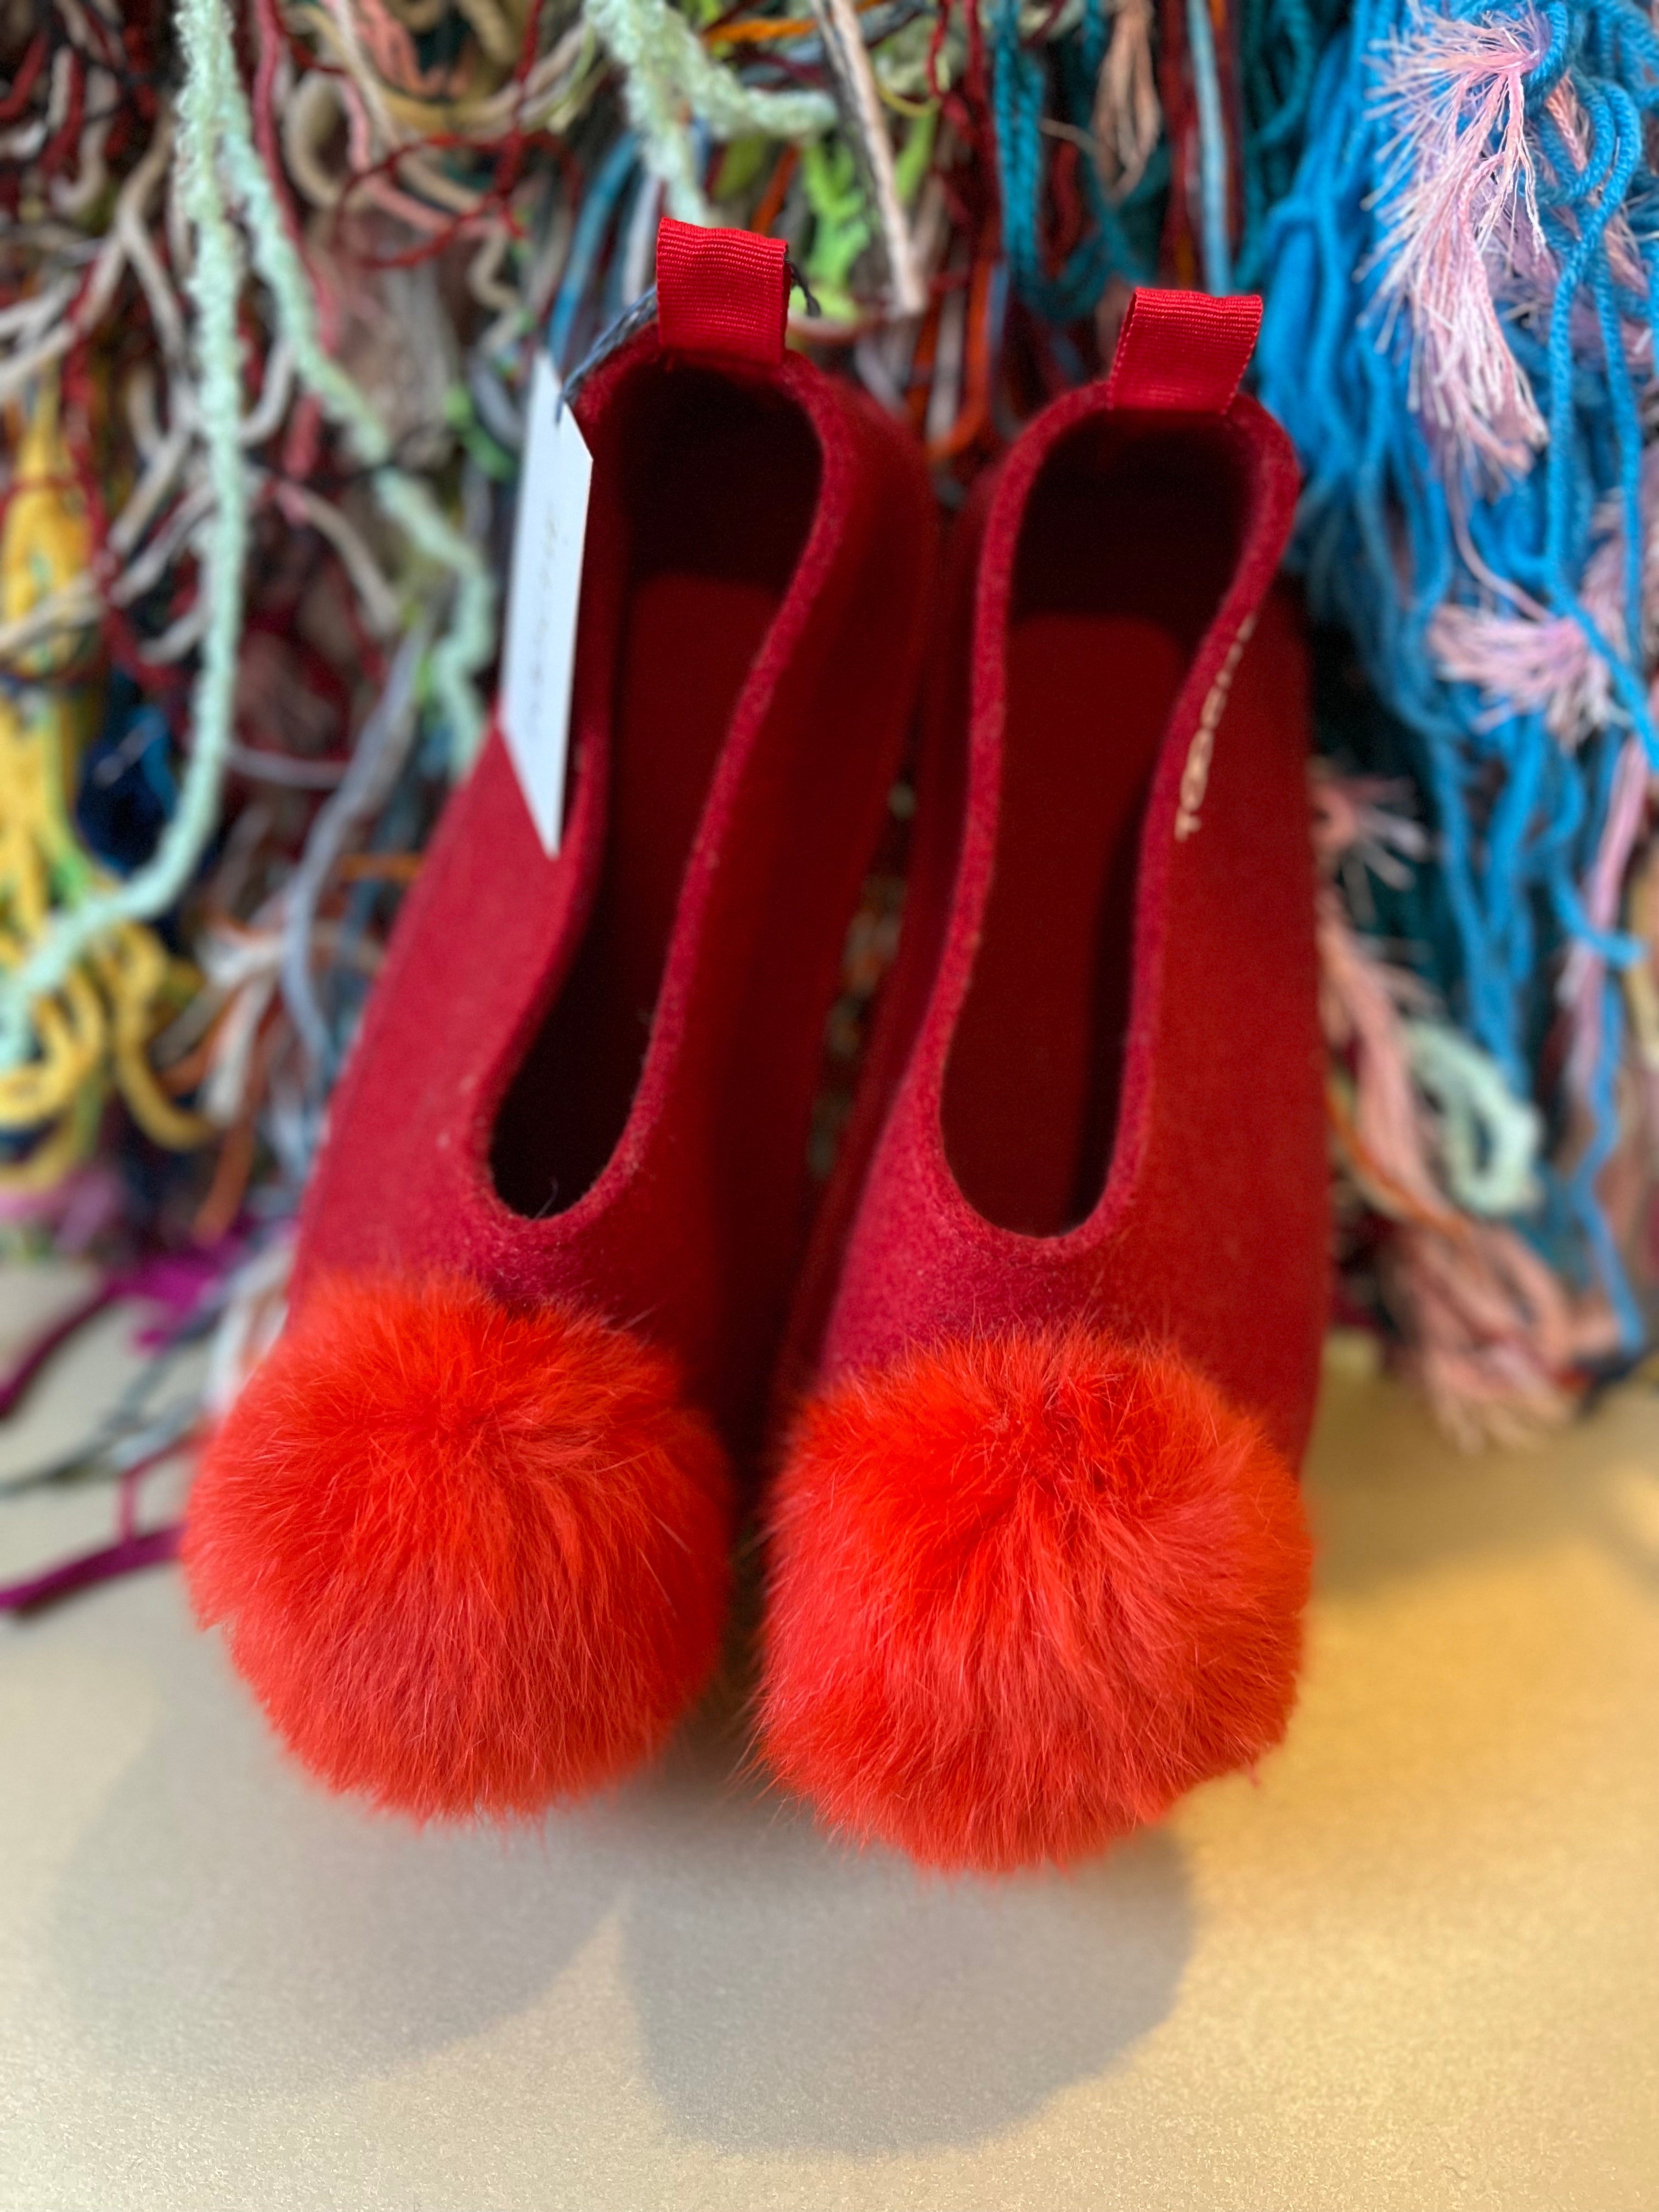 CORAL kids slippers